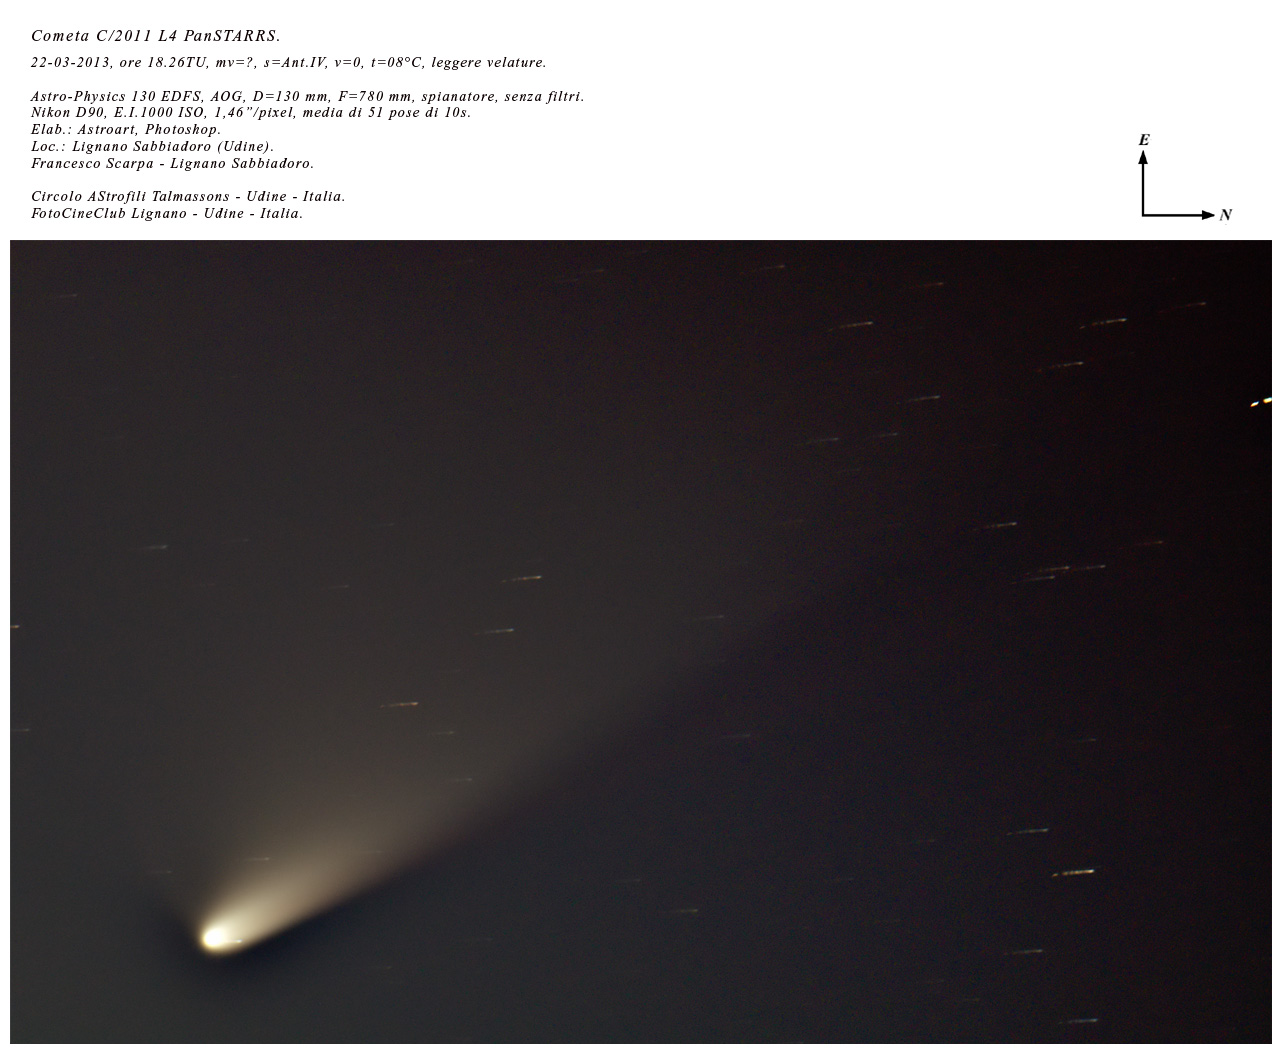 C/2011 L4 (PanStarrs) taken in Lignano Sabbiadoro in march 22nd, 2013: 309 KB; click on the image to enlarge